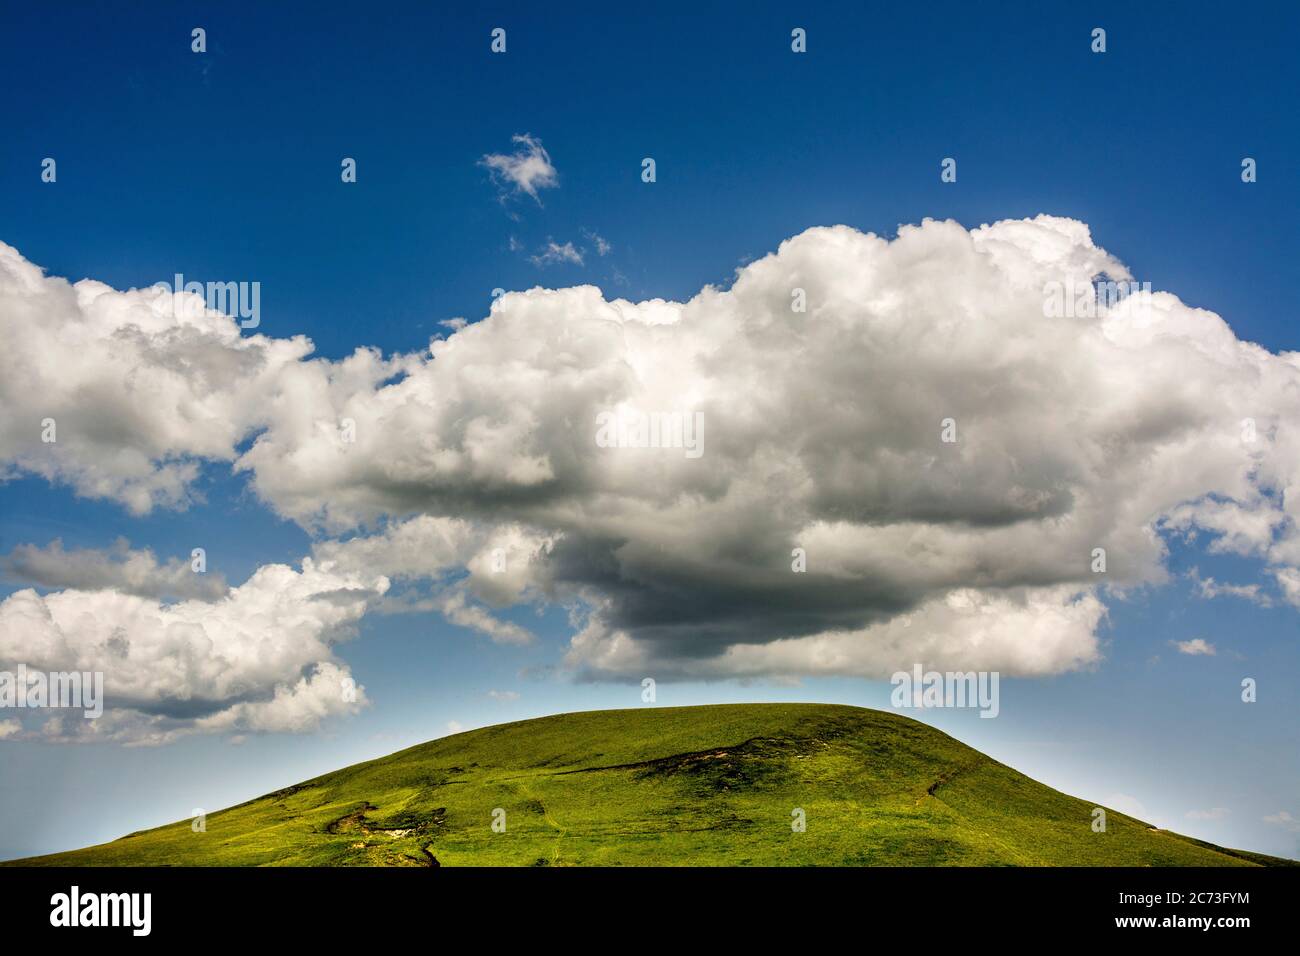 Cloudy sky and mountain, Auvergne-Rhone-Alpes, France Stock Photo